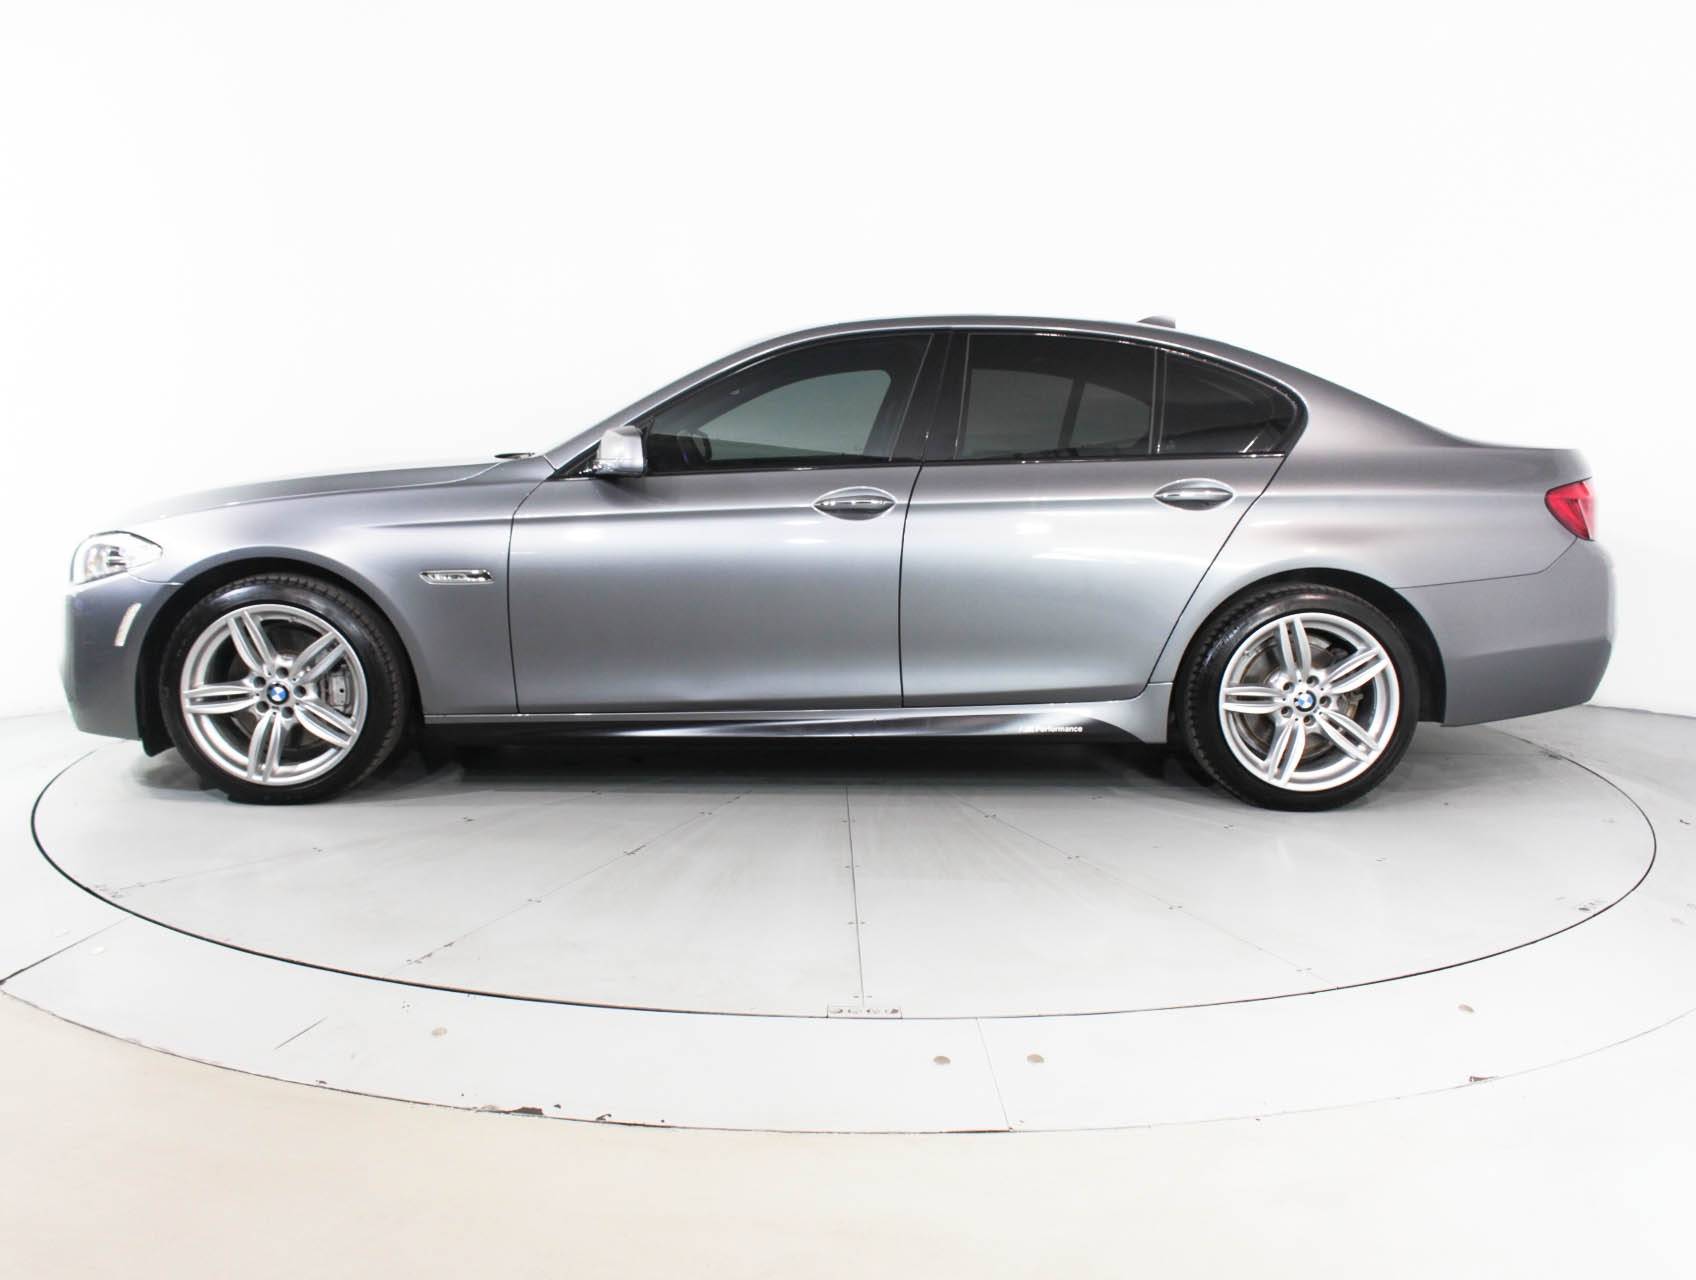 Used 2012 BMW 5 SERIES 535i M Sport for sale in MIAMI | 89740